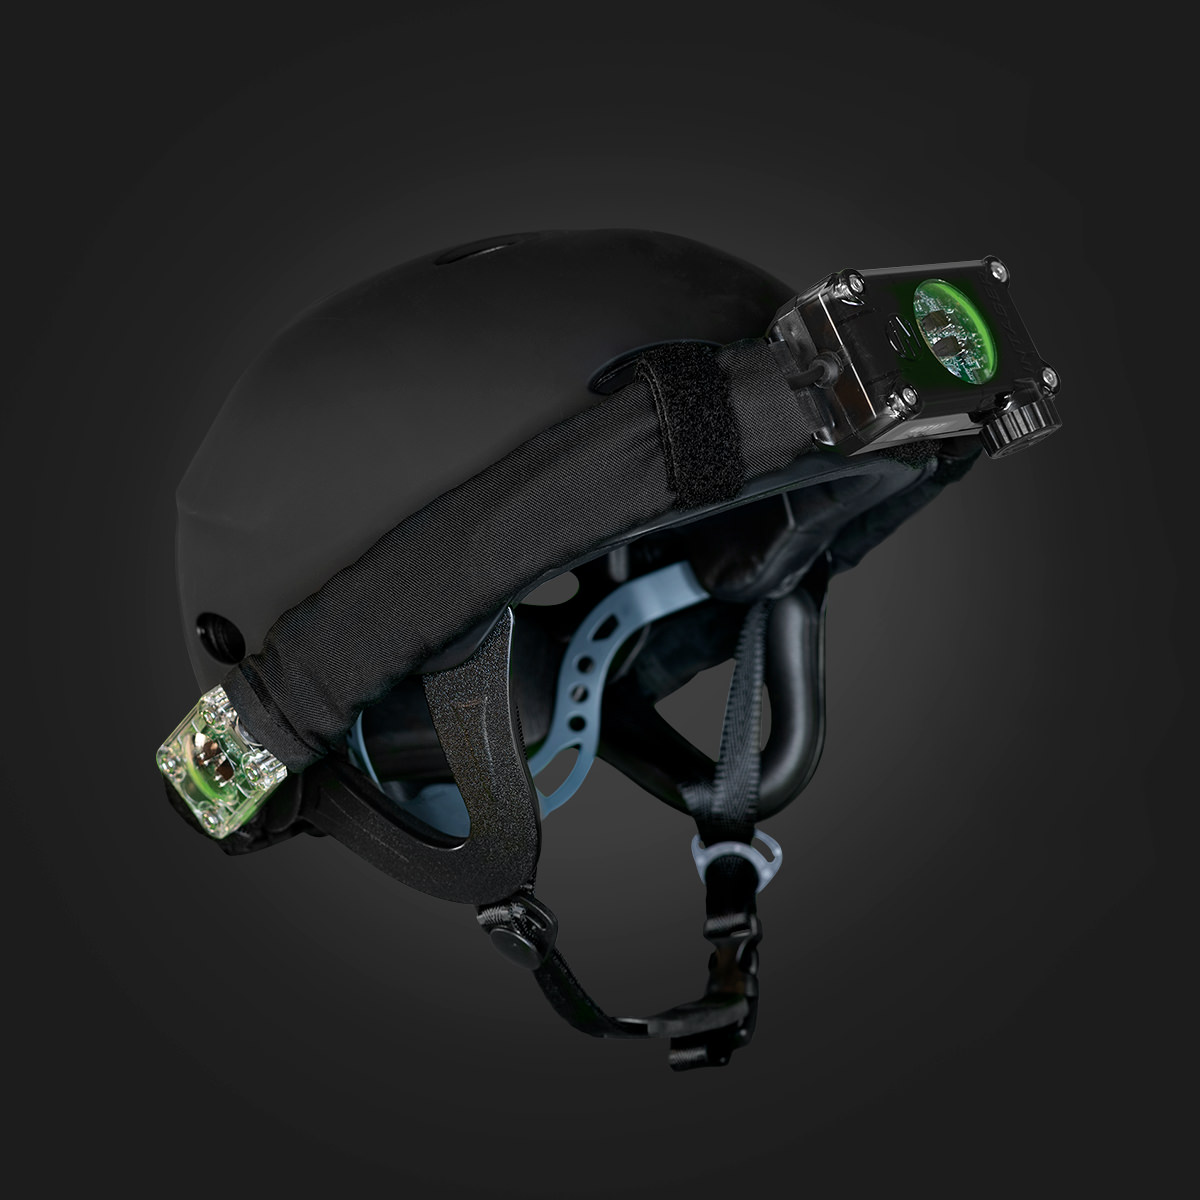 Intager headset